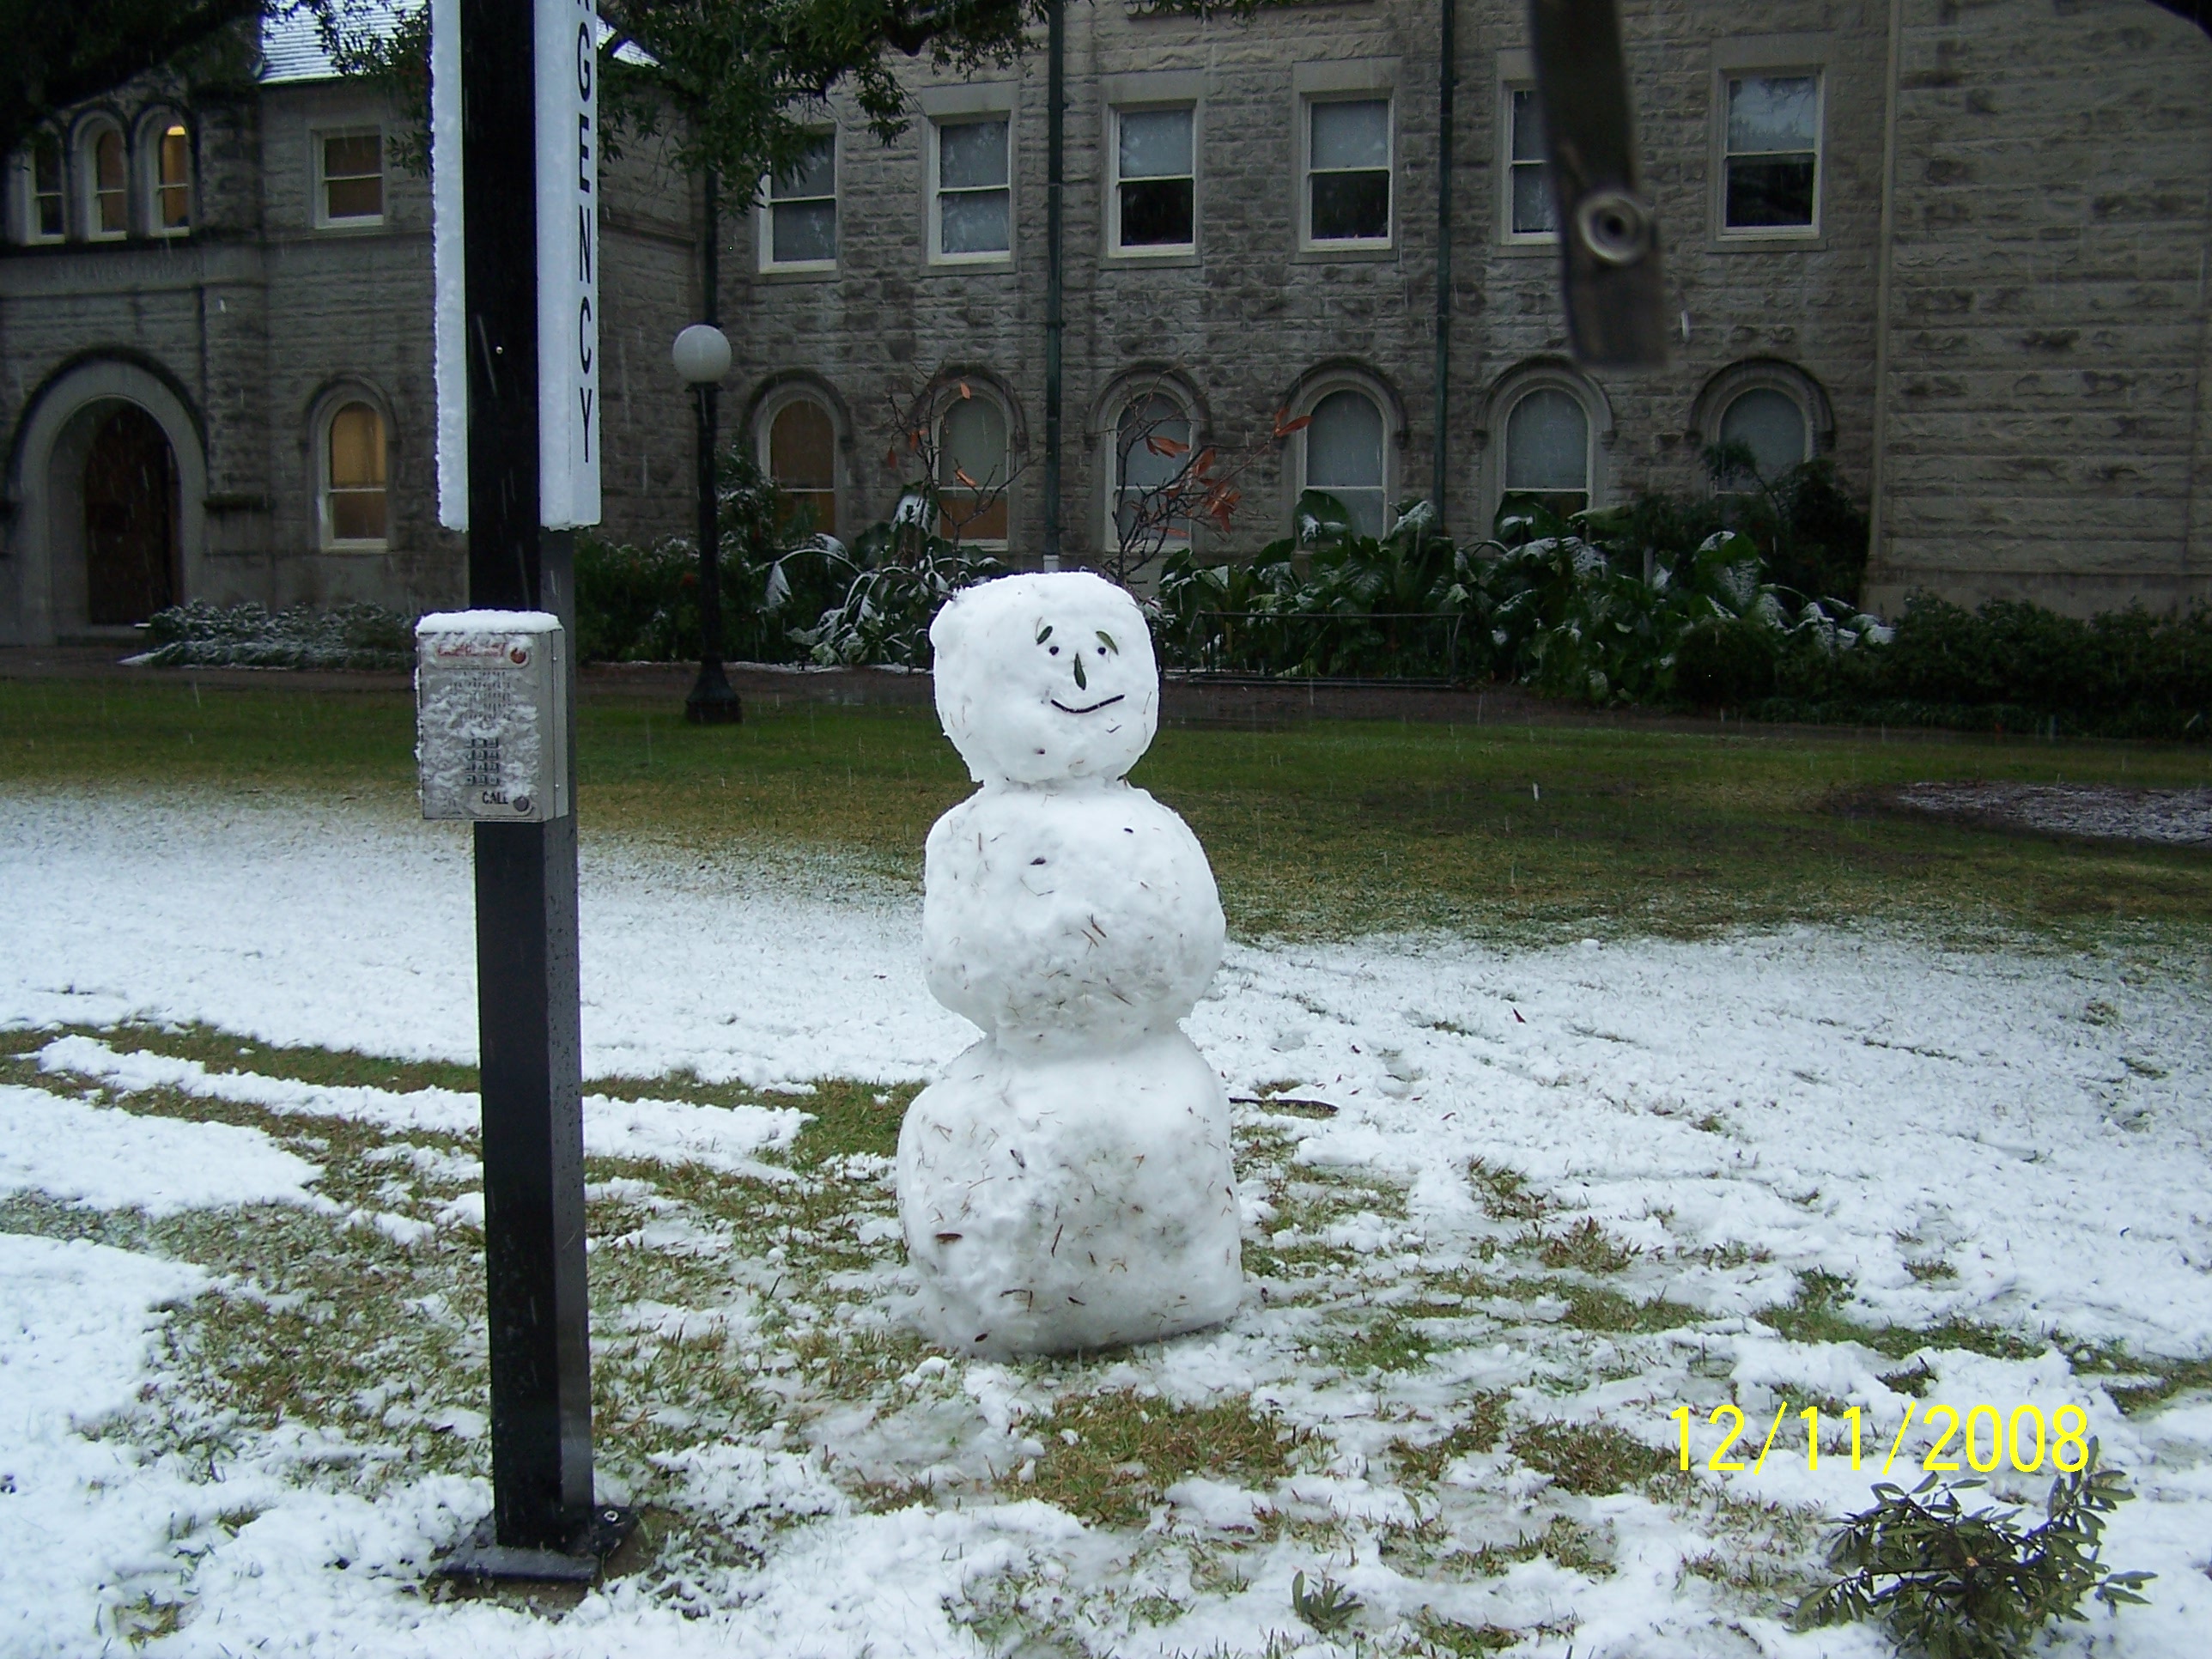 Tulane in the snow 12-11-08